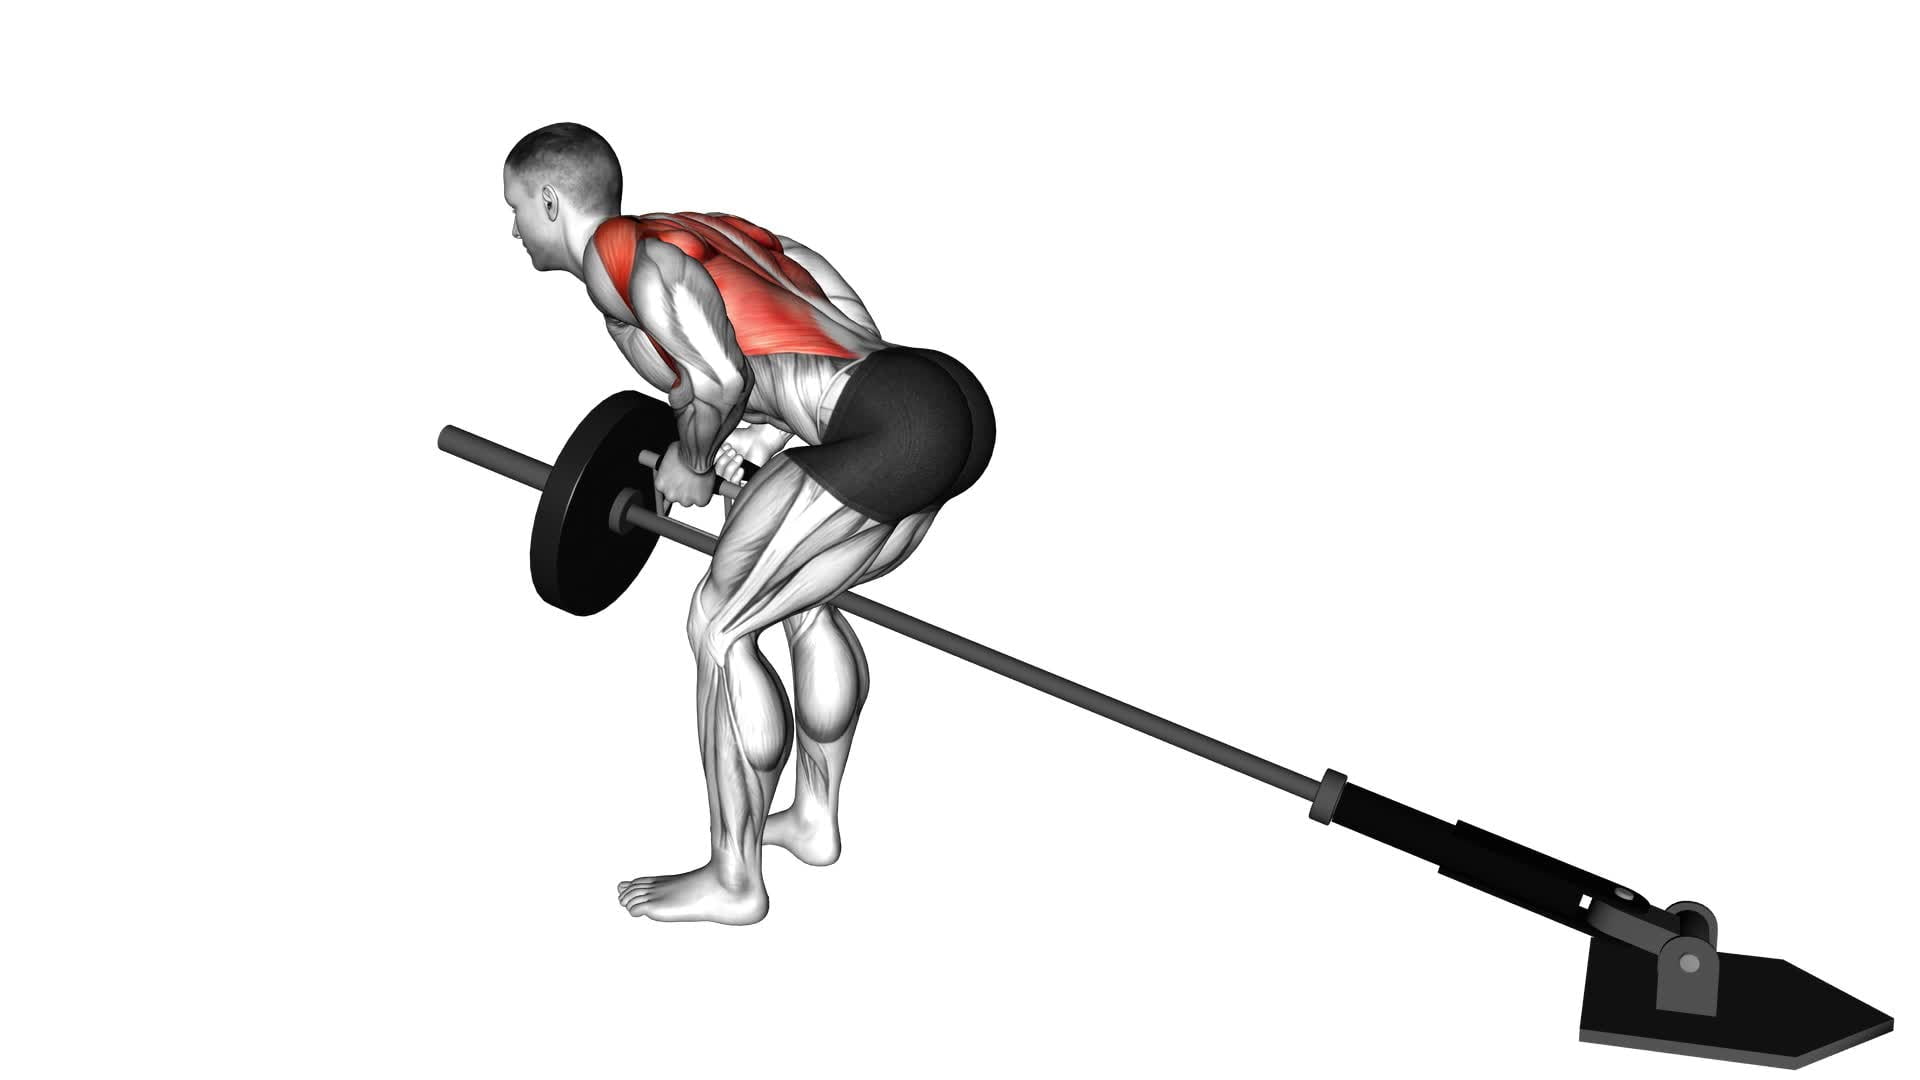 Landmine Bent Over Row With V-Bar (Plate Loaded) - Video Exercise Guide & Tips